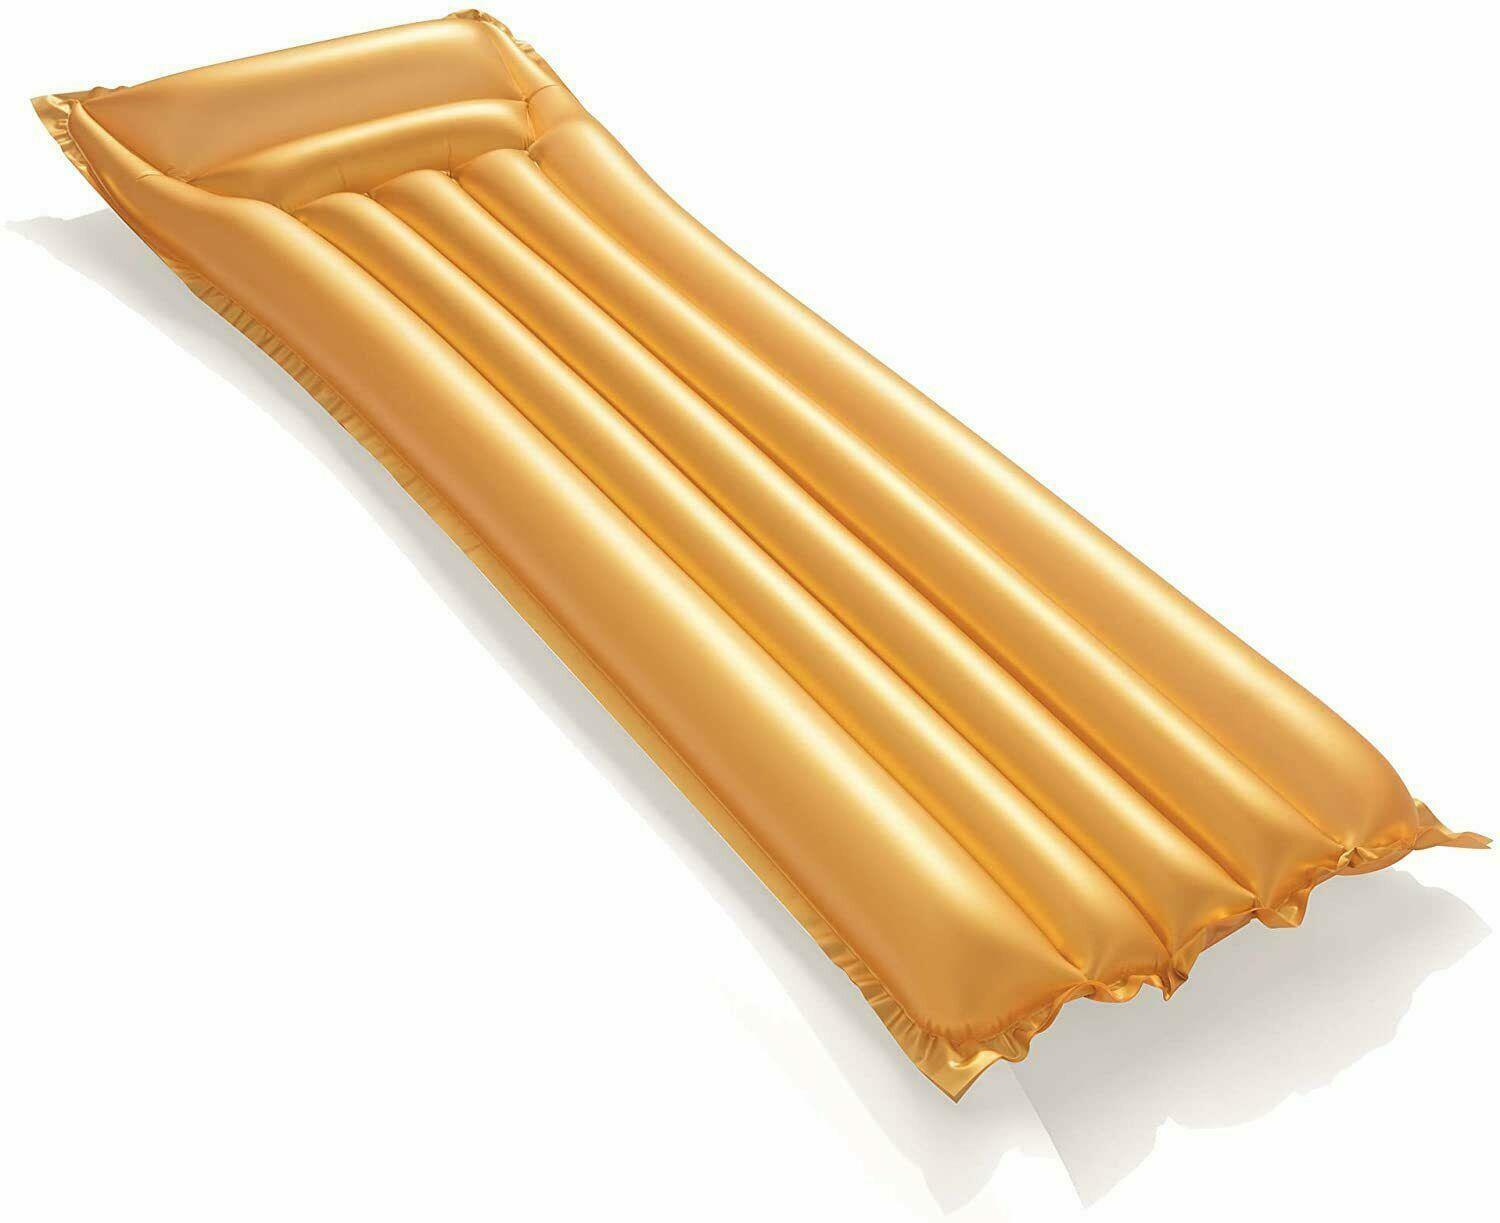 Bestway Inflatable Lilo Gold Swim Mat Swimming Pool Air Bed Beach Mat - Ourkids - Bestway